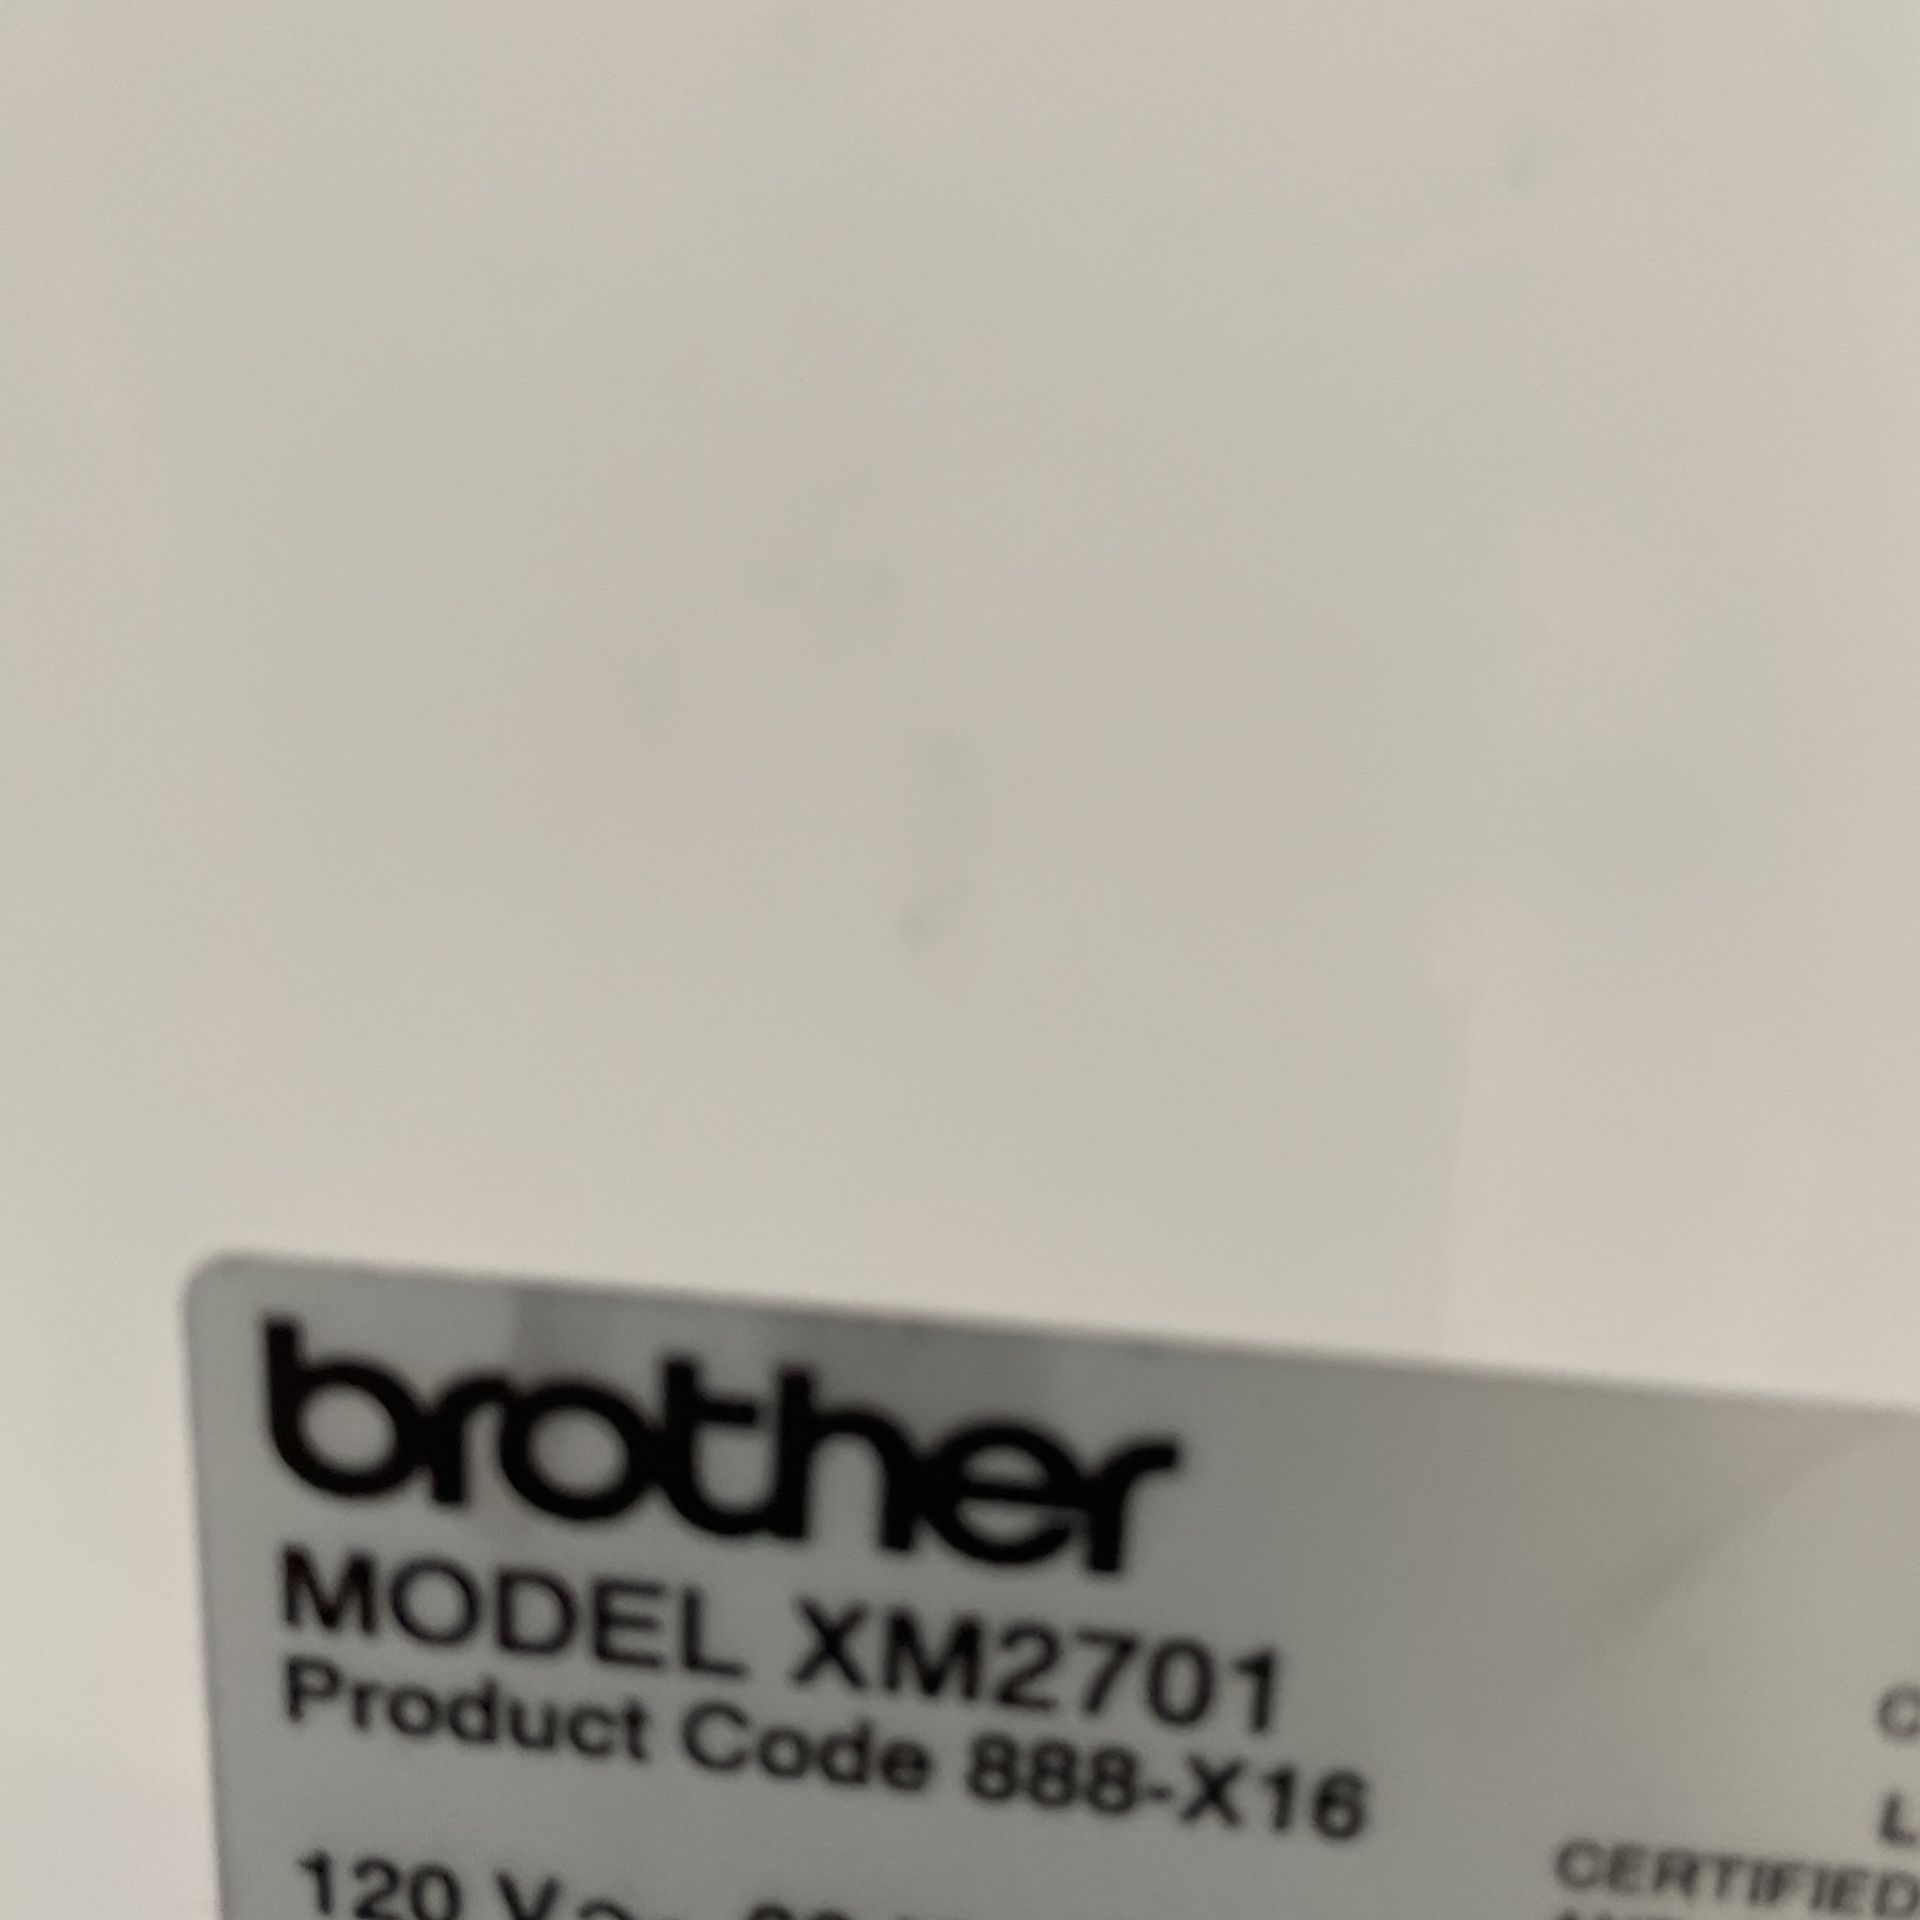 Brother XM2701 Sewing Machine With Accessories + Fabrics for Sale in West  Hollywood, CA - OfferUp